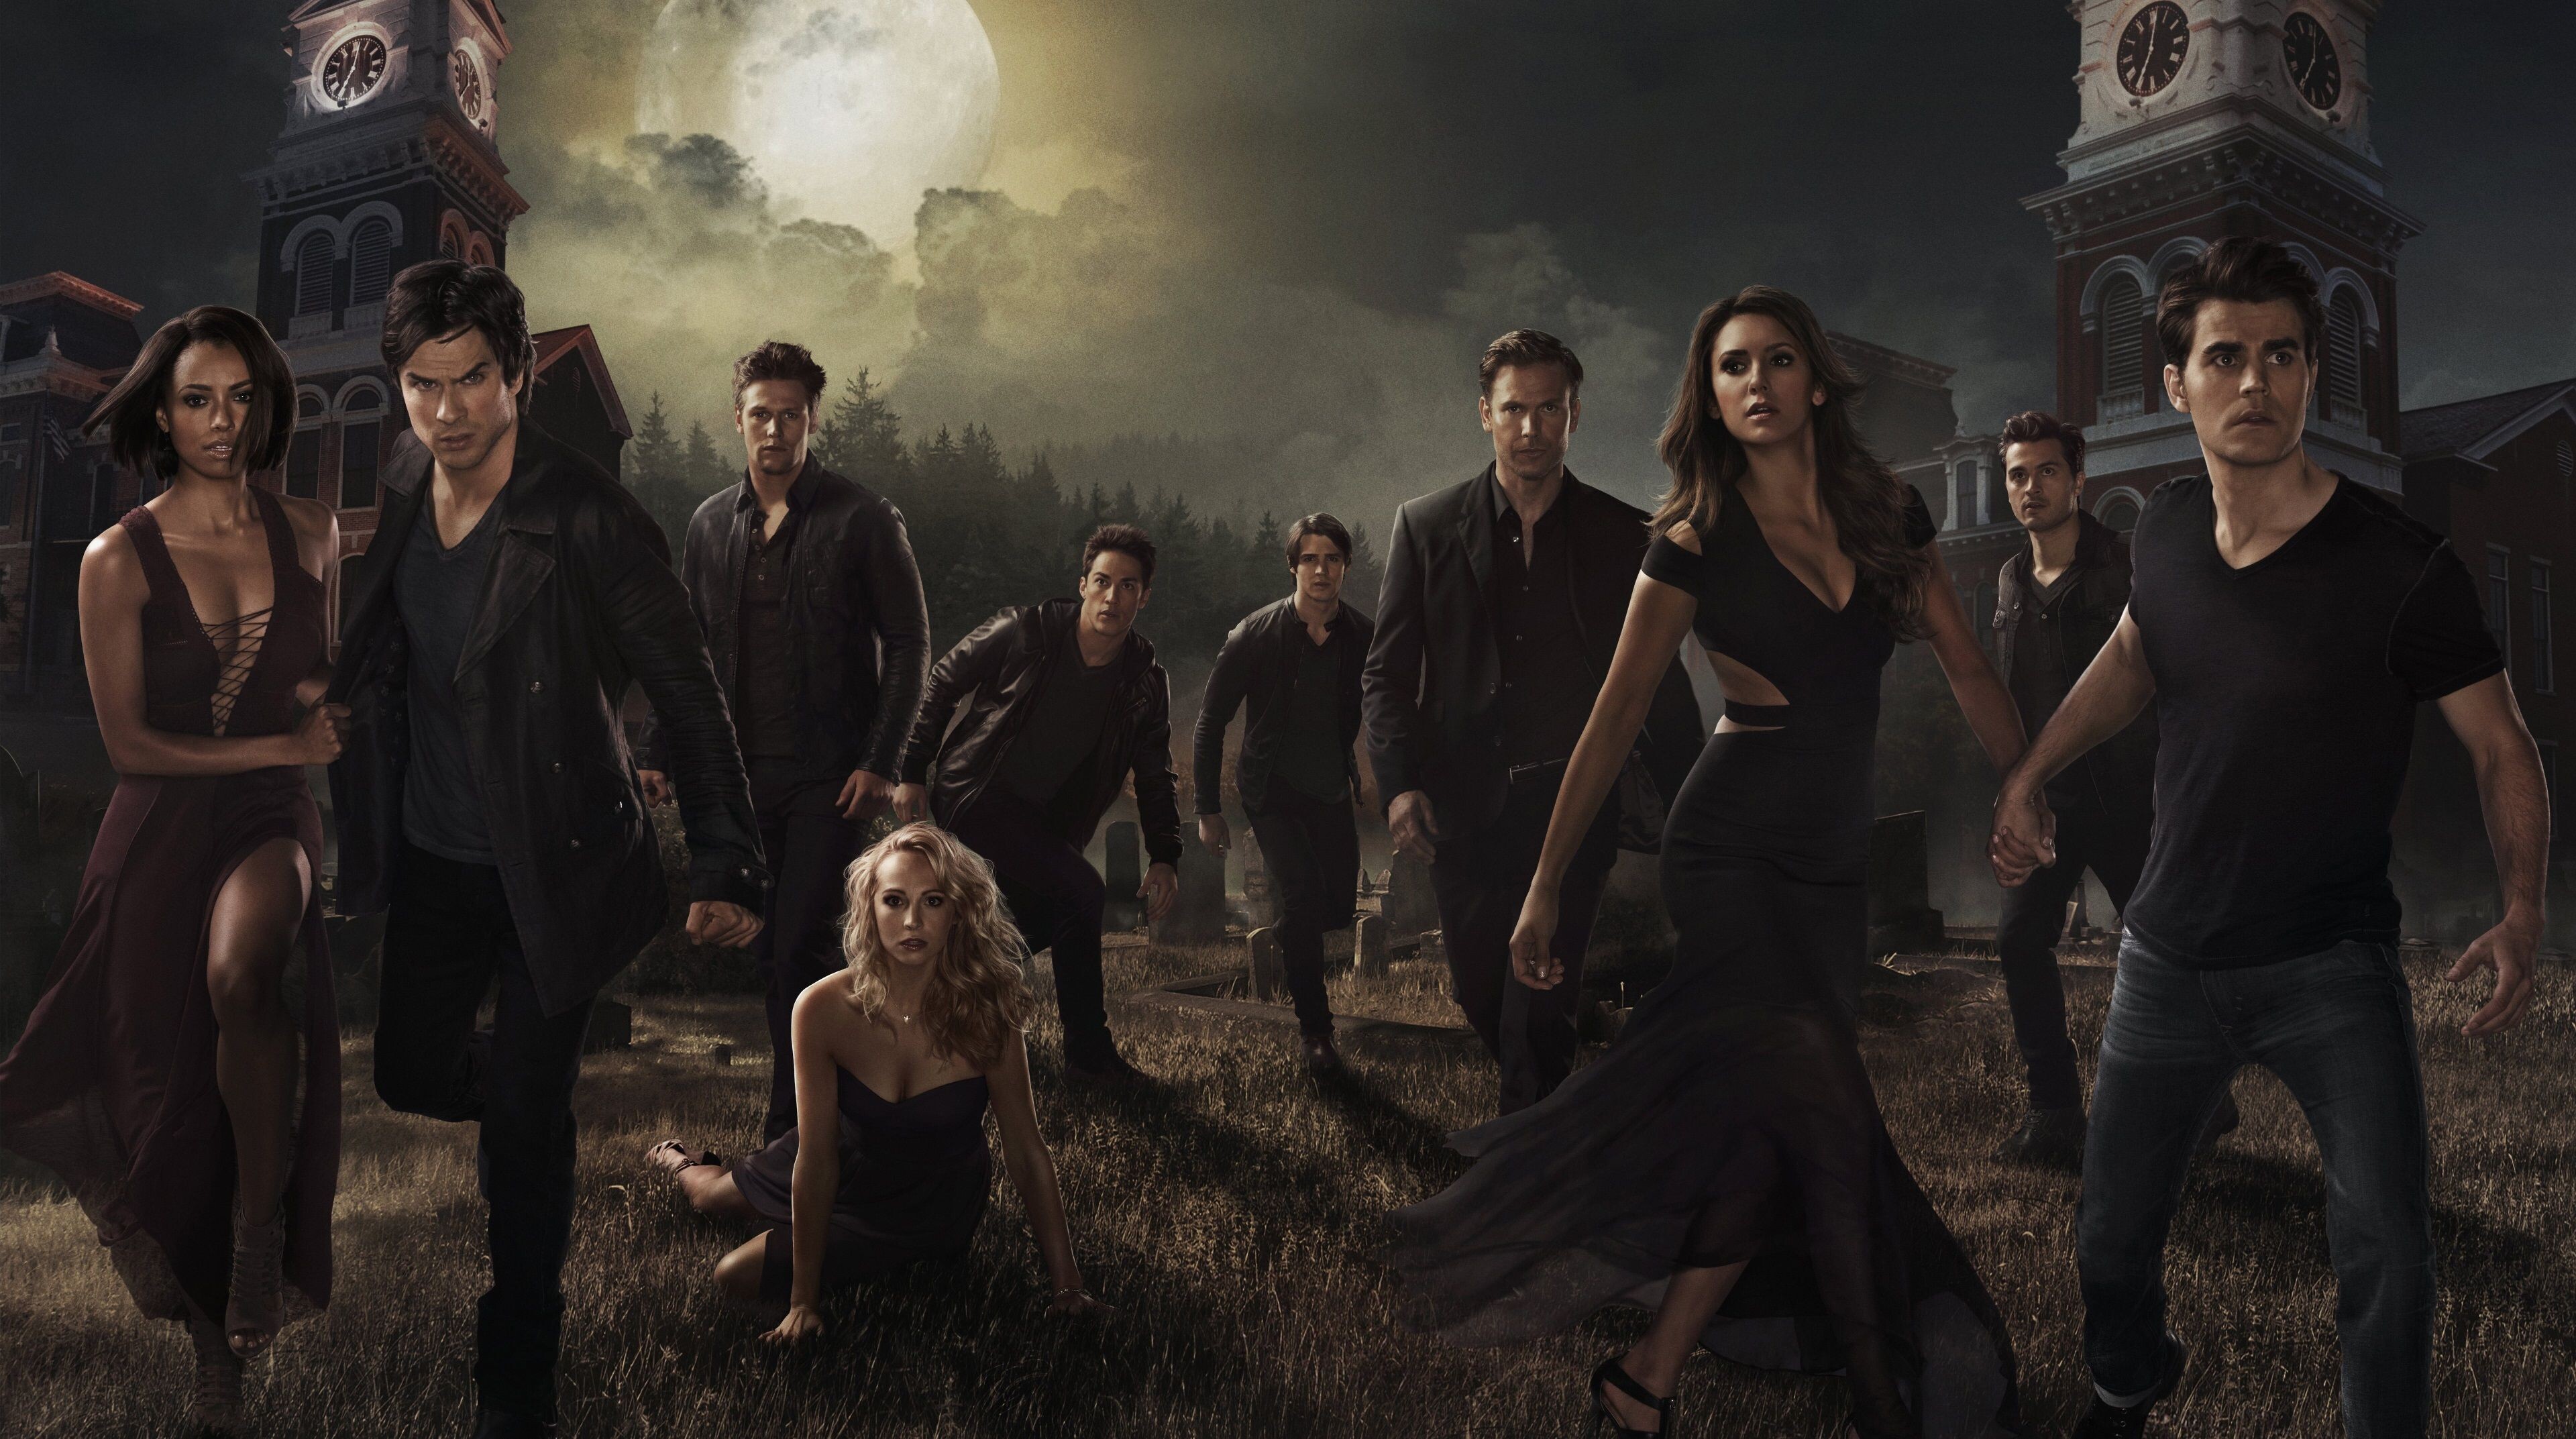 The Vampire Diaries (TV Series): TV Show, Based On The Book Series Written By L. J. Smith, 2009, Vampires. 3840x2150 HD Background.